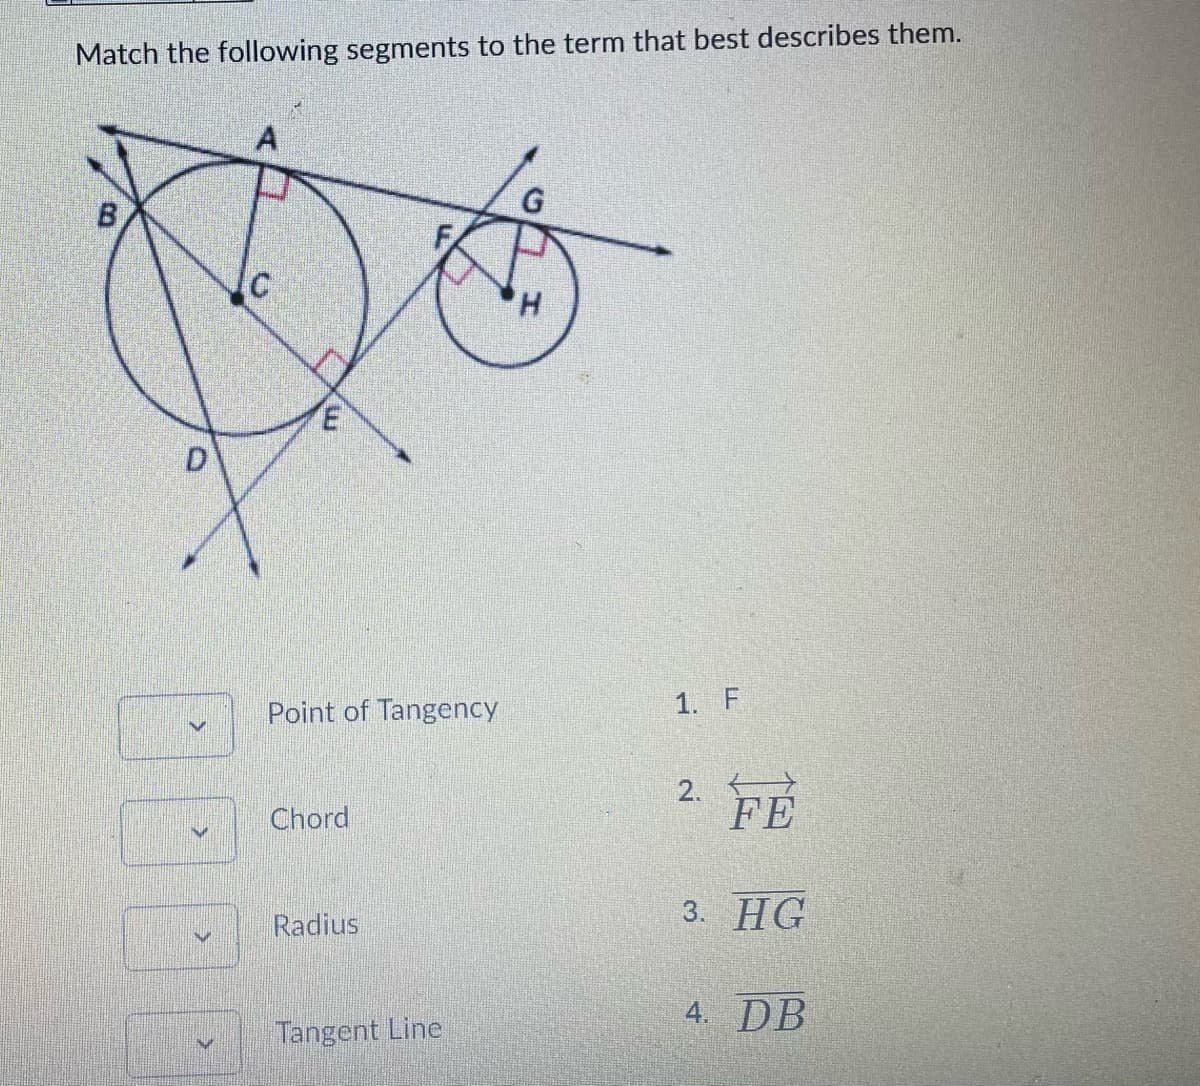 Match the following segments to the term that best describes them.
G
H.
Point of Tangency
1. F
2.
FE
Chord
3. HG
Radius
4. DB
Tangent Line
F.
D.
